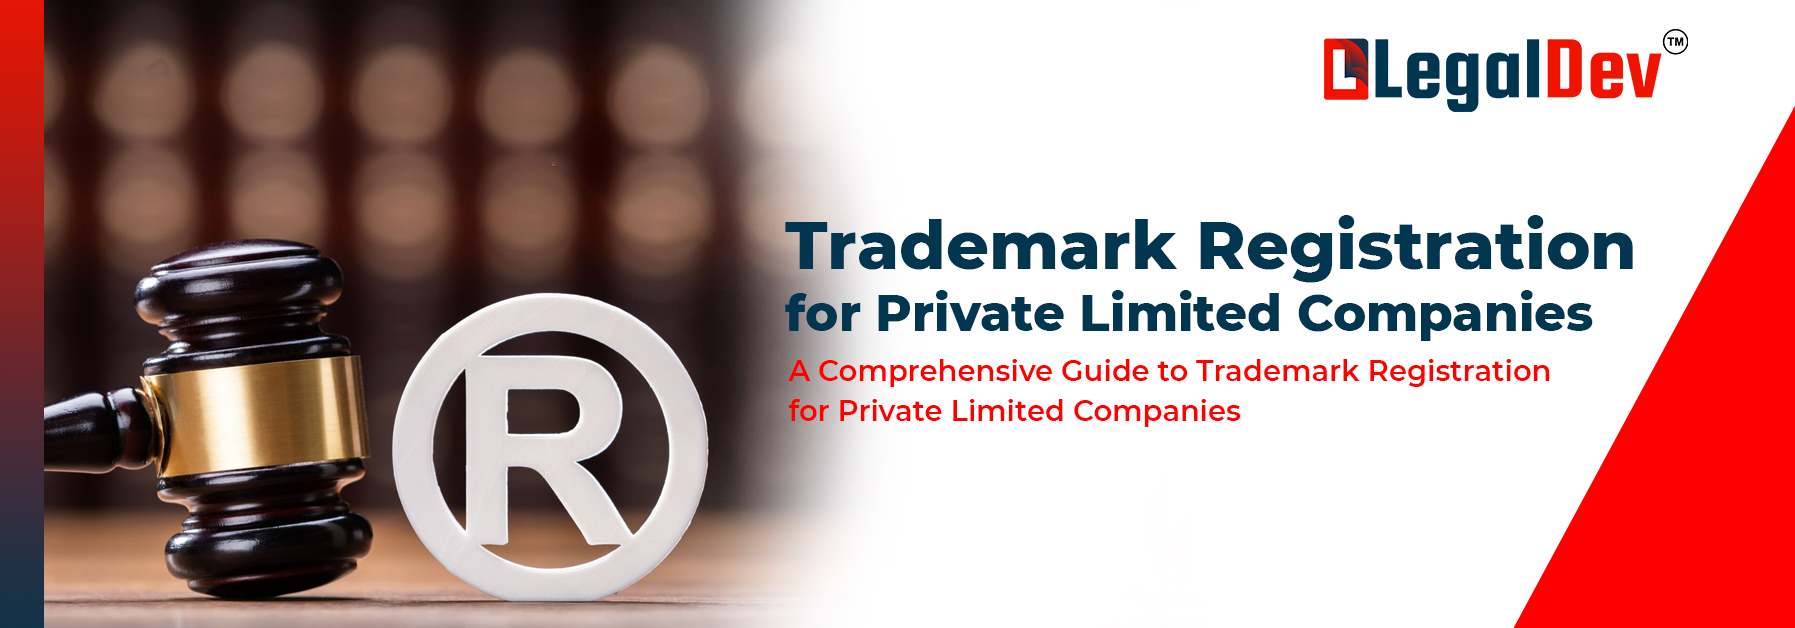 Trademark-for-Private-Limited-Companies-1